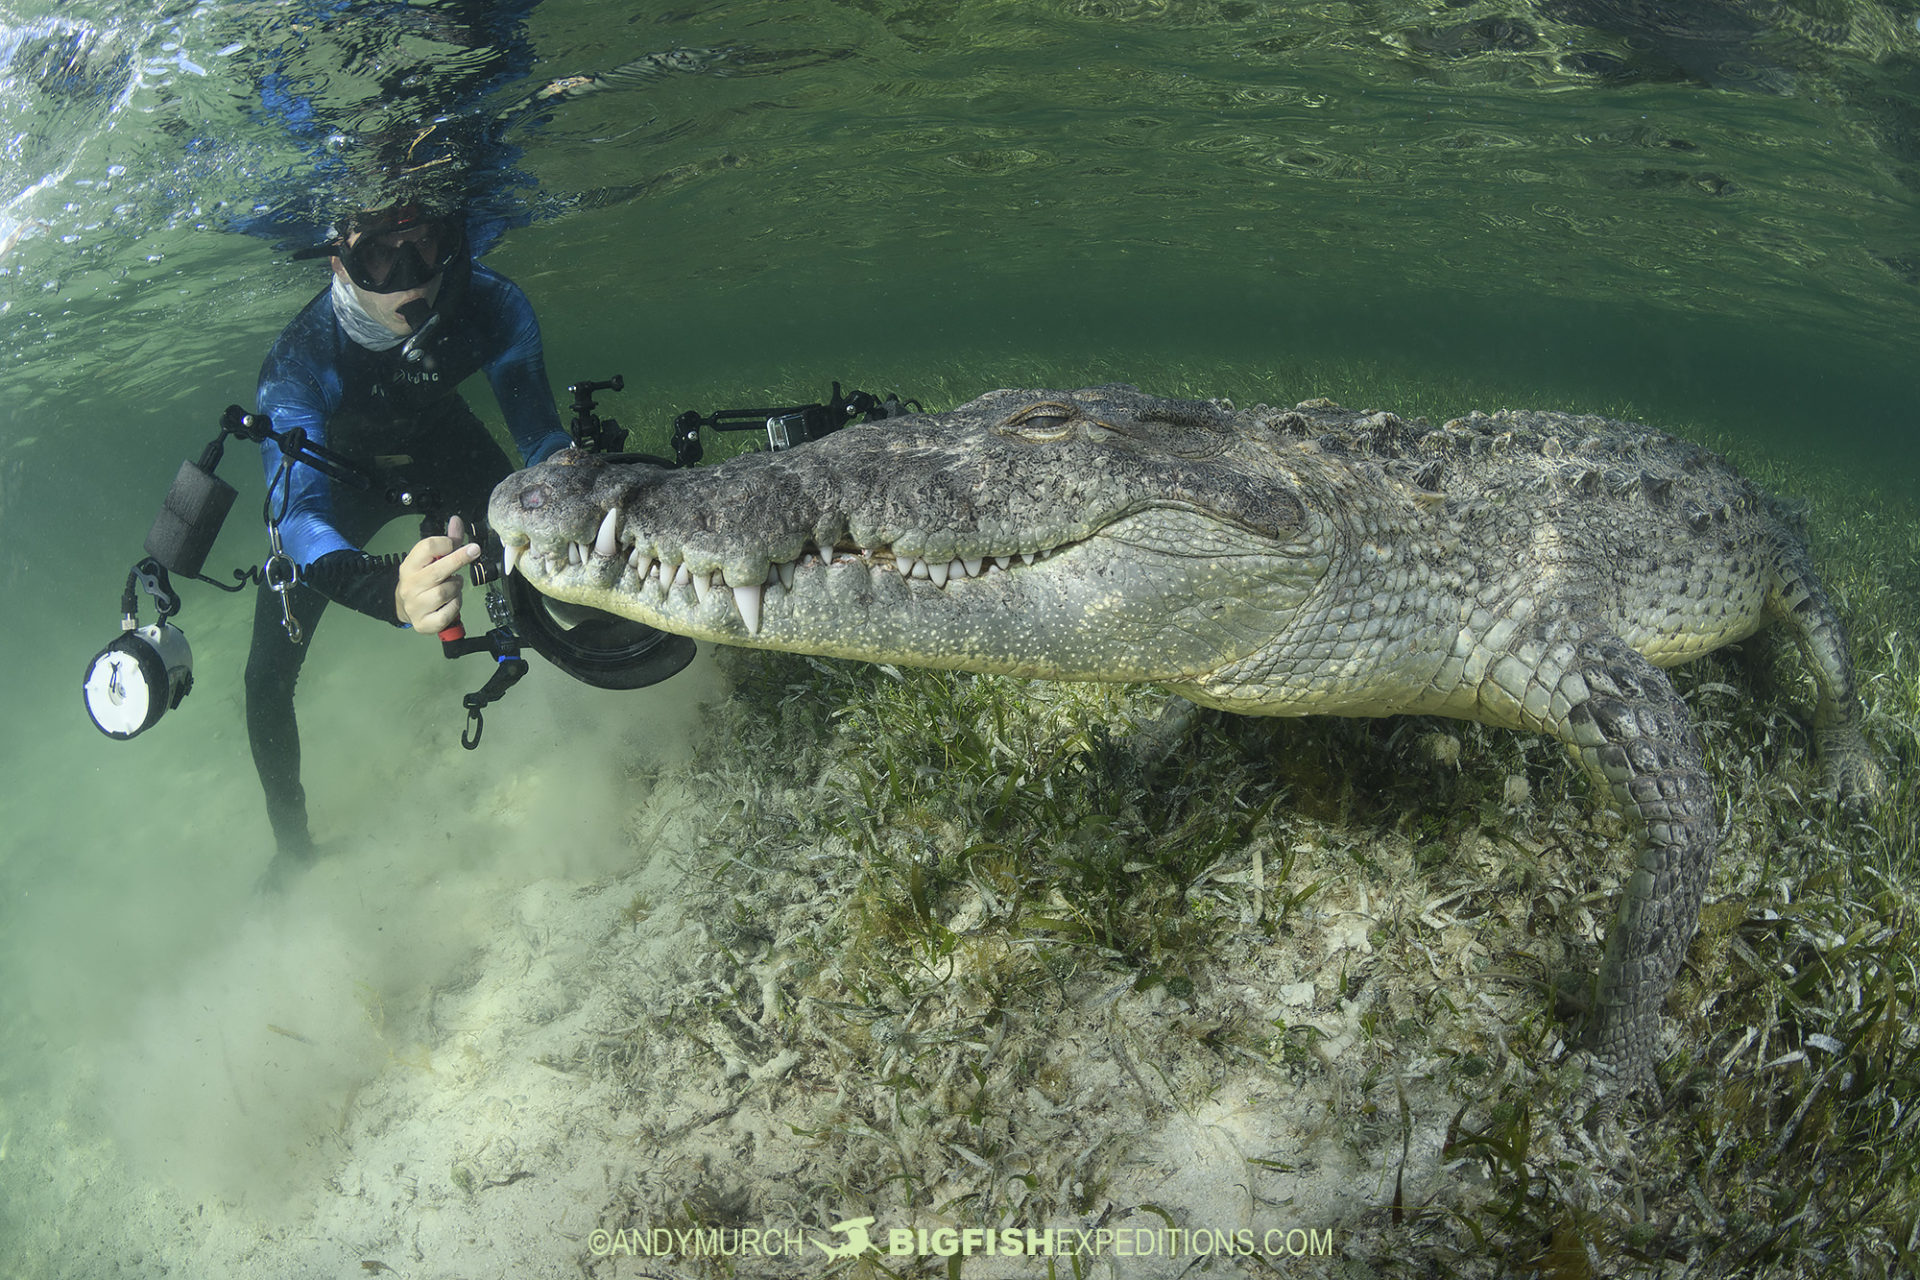 Snorkeling with Crocodiles in Mexico.